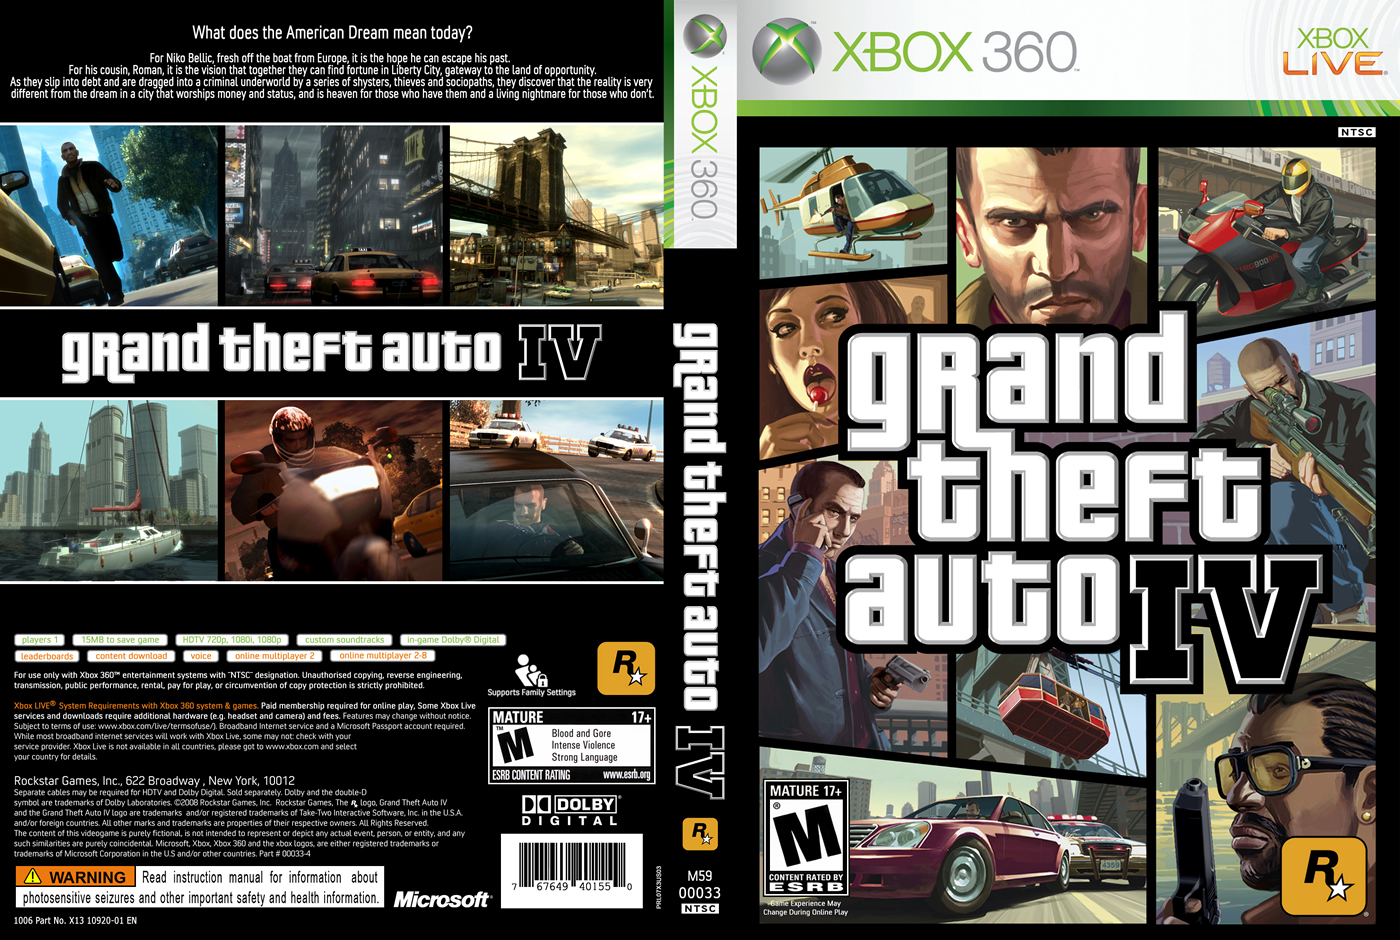 how much is gta 4 for xbox 360 at gamestop